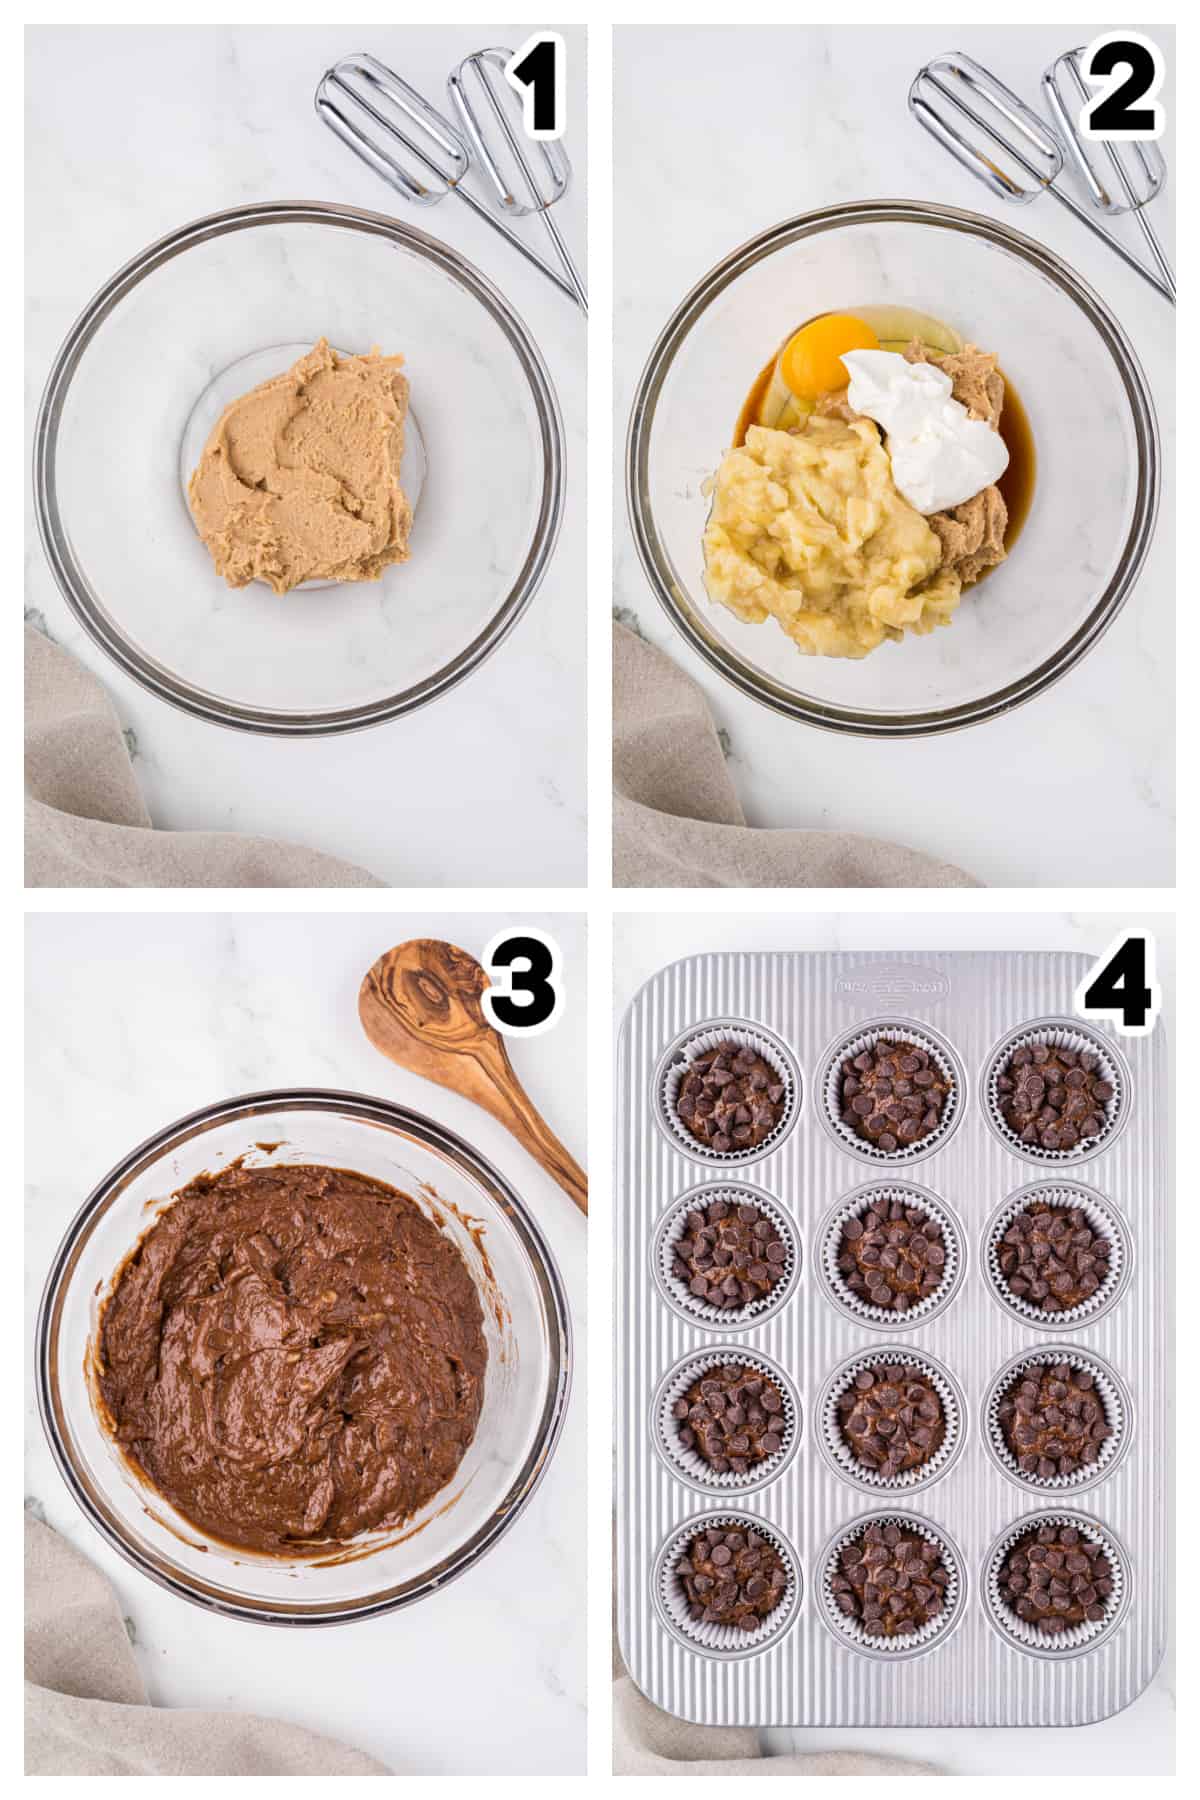 Collage showing how to make chocolate banana muffins.